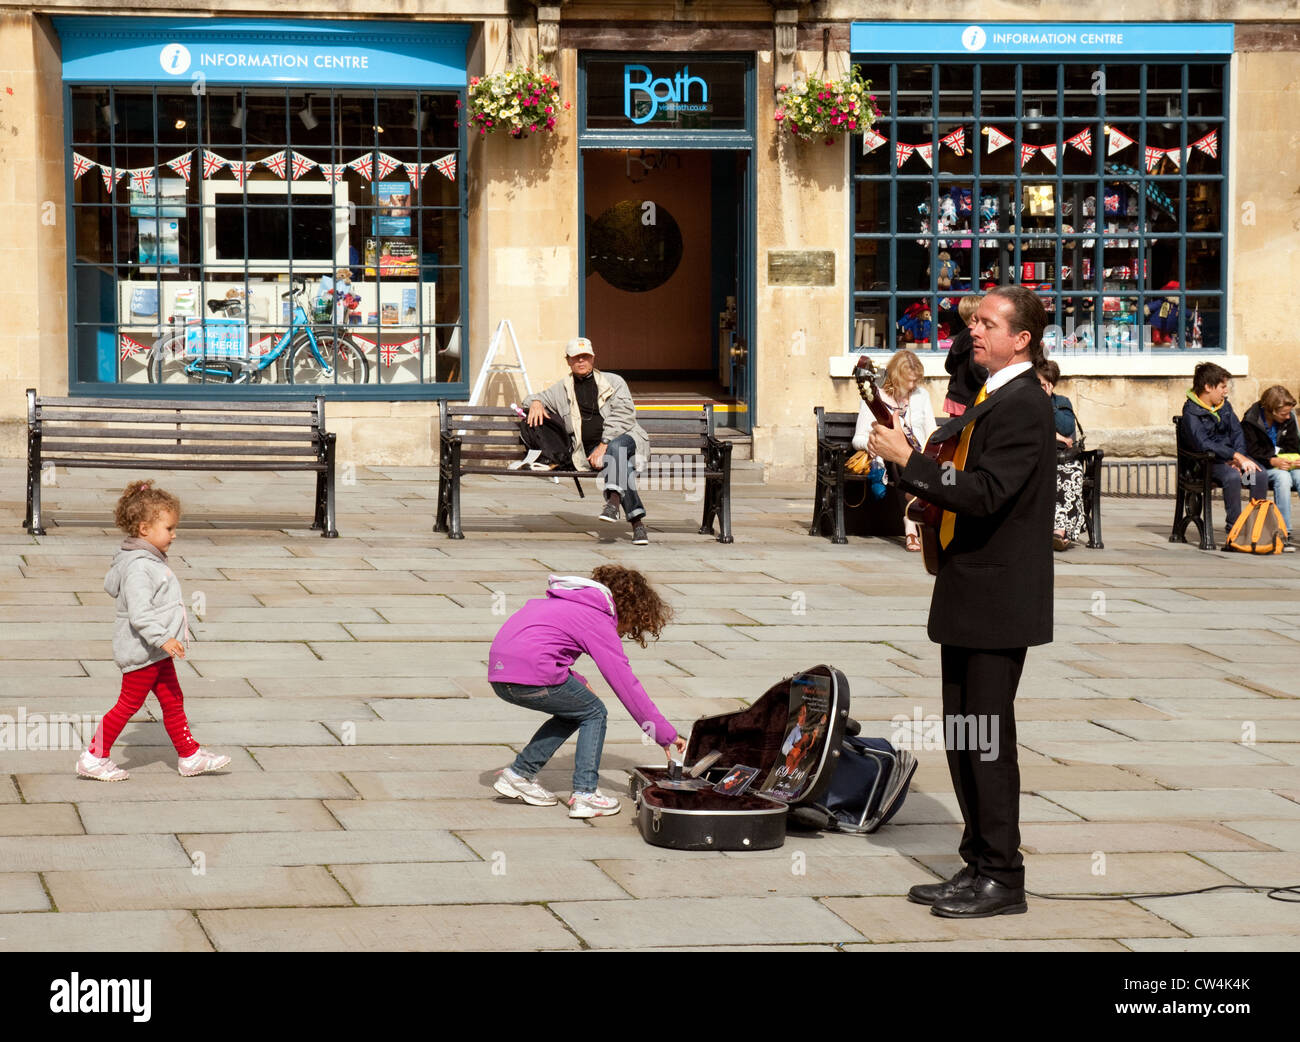 a-child-giving-money-to-a-busker-playing-in-the-abbey-churchyard-bath-CW4K4K.jpg